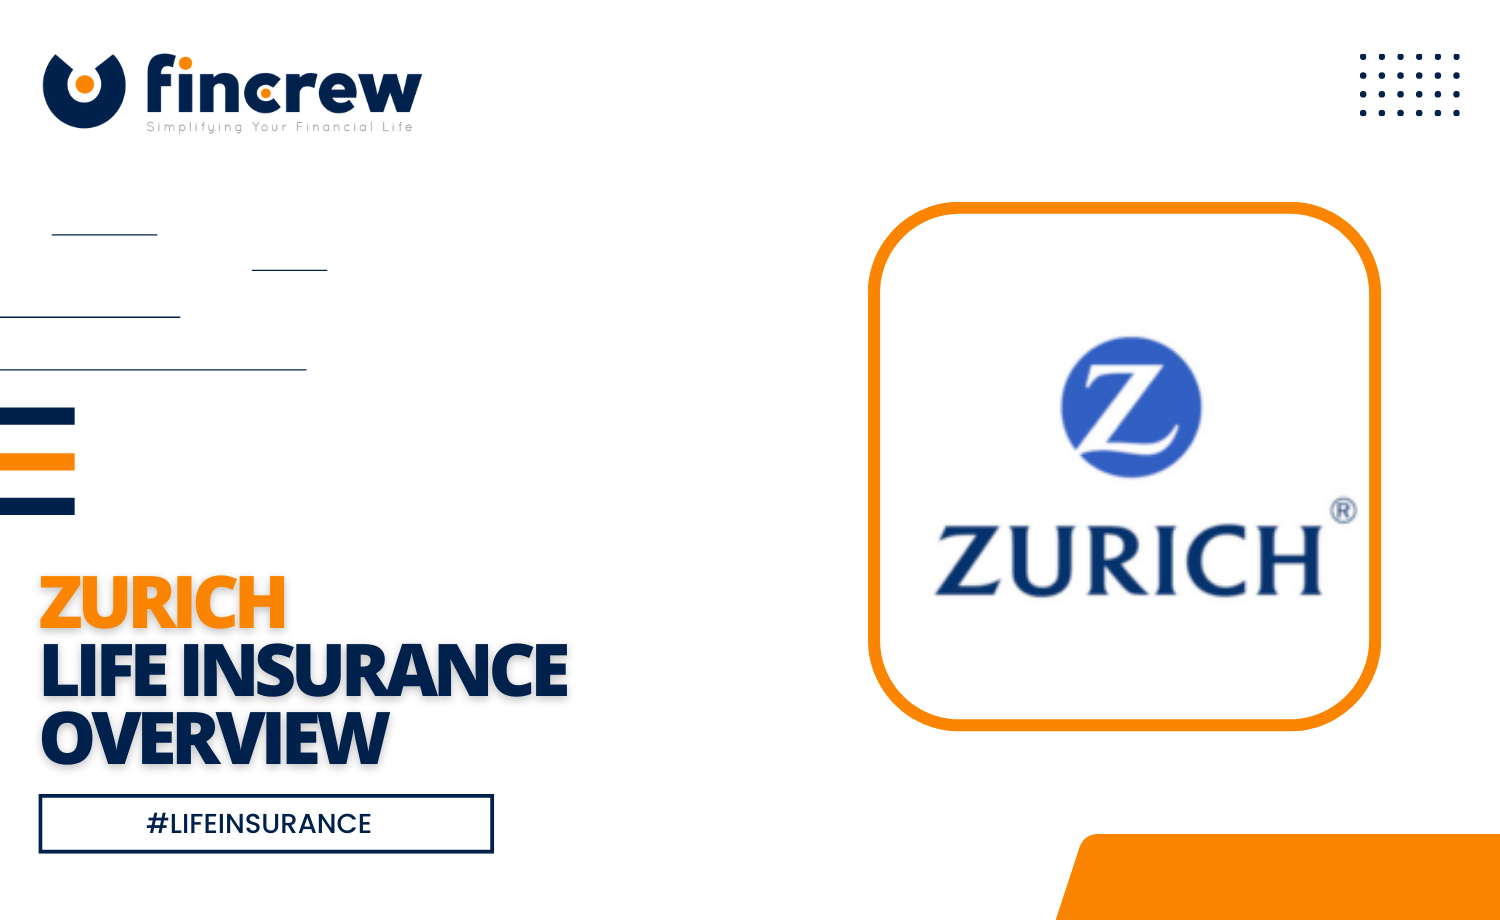 Zurich Life Insurance Overview Blog Featured Image